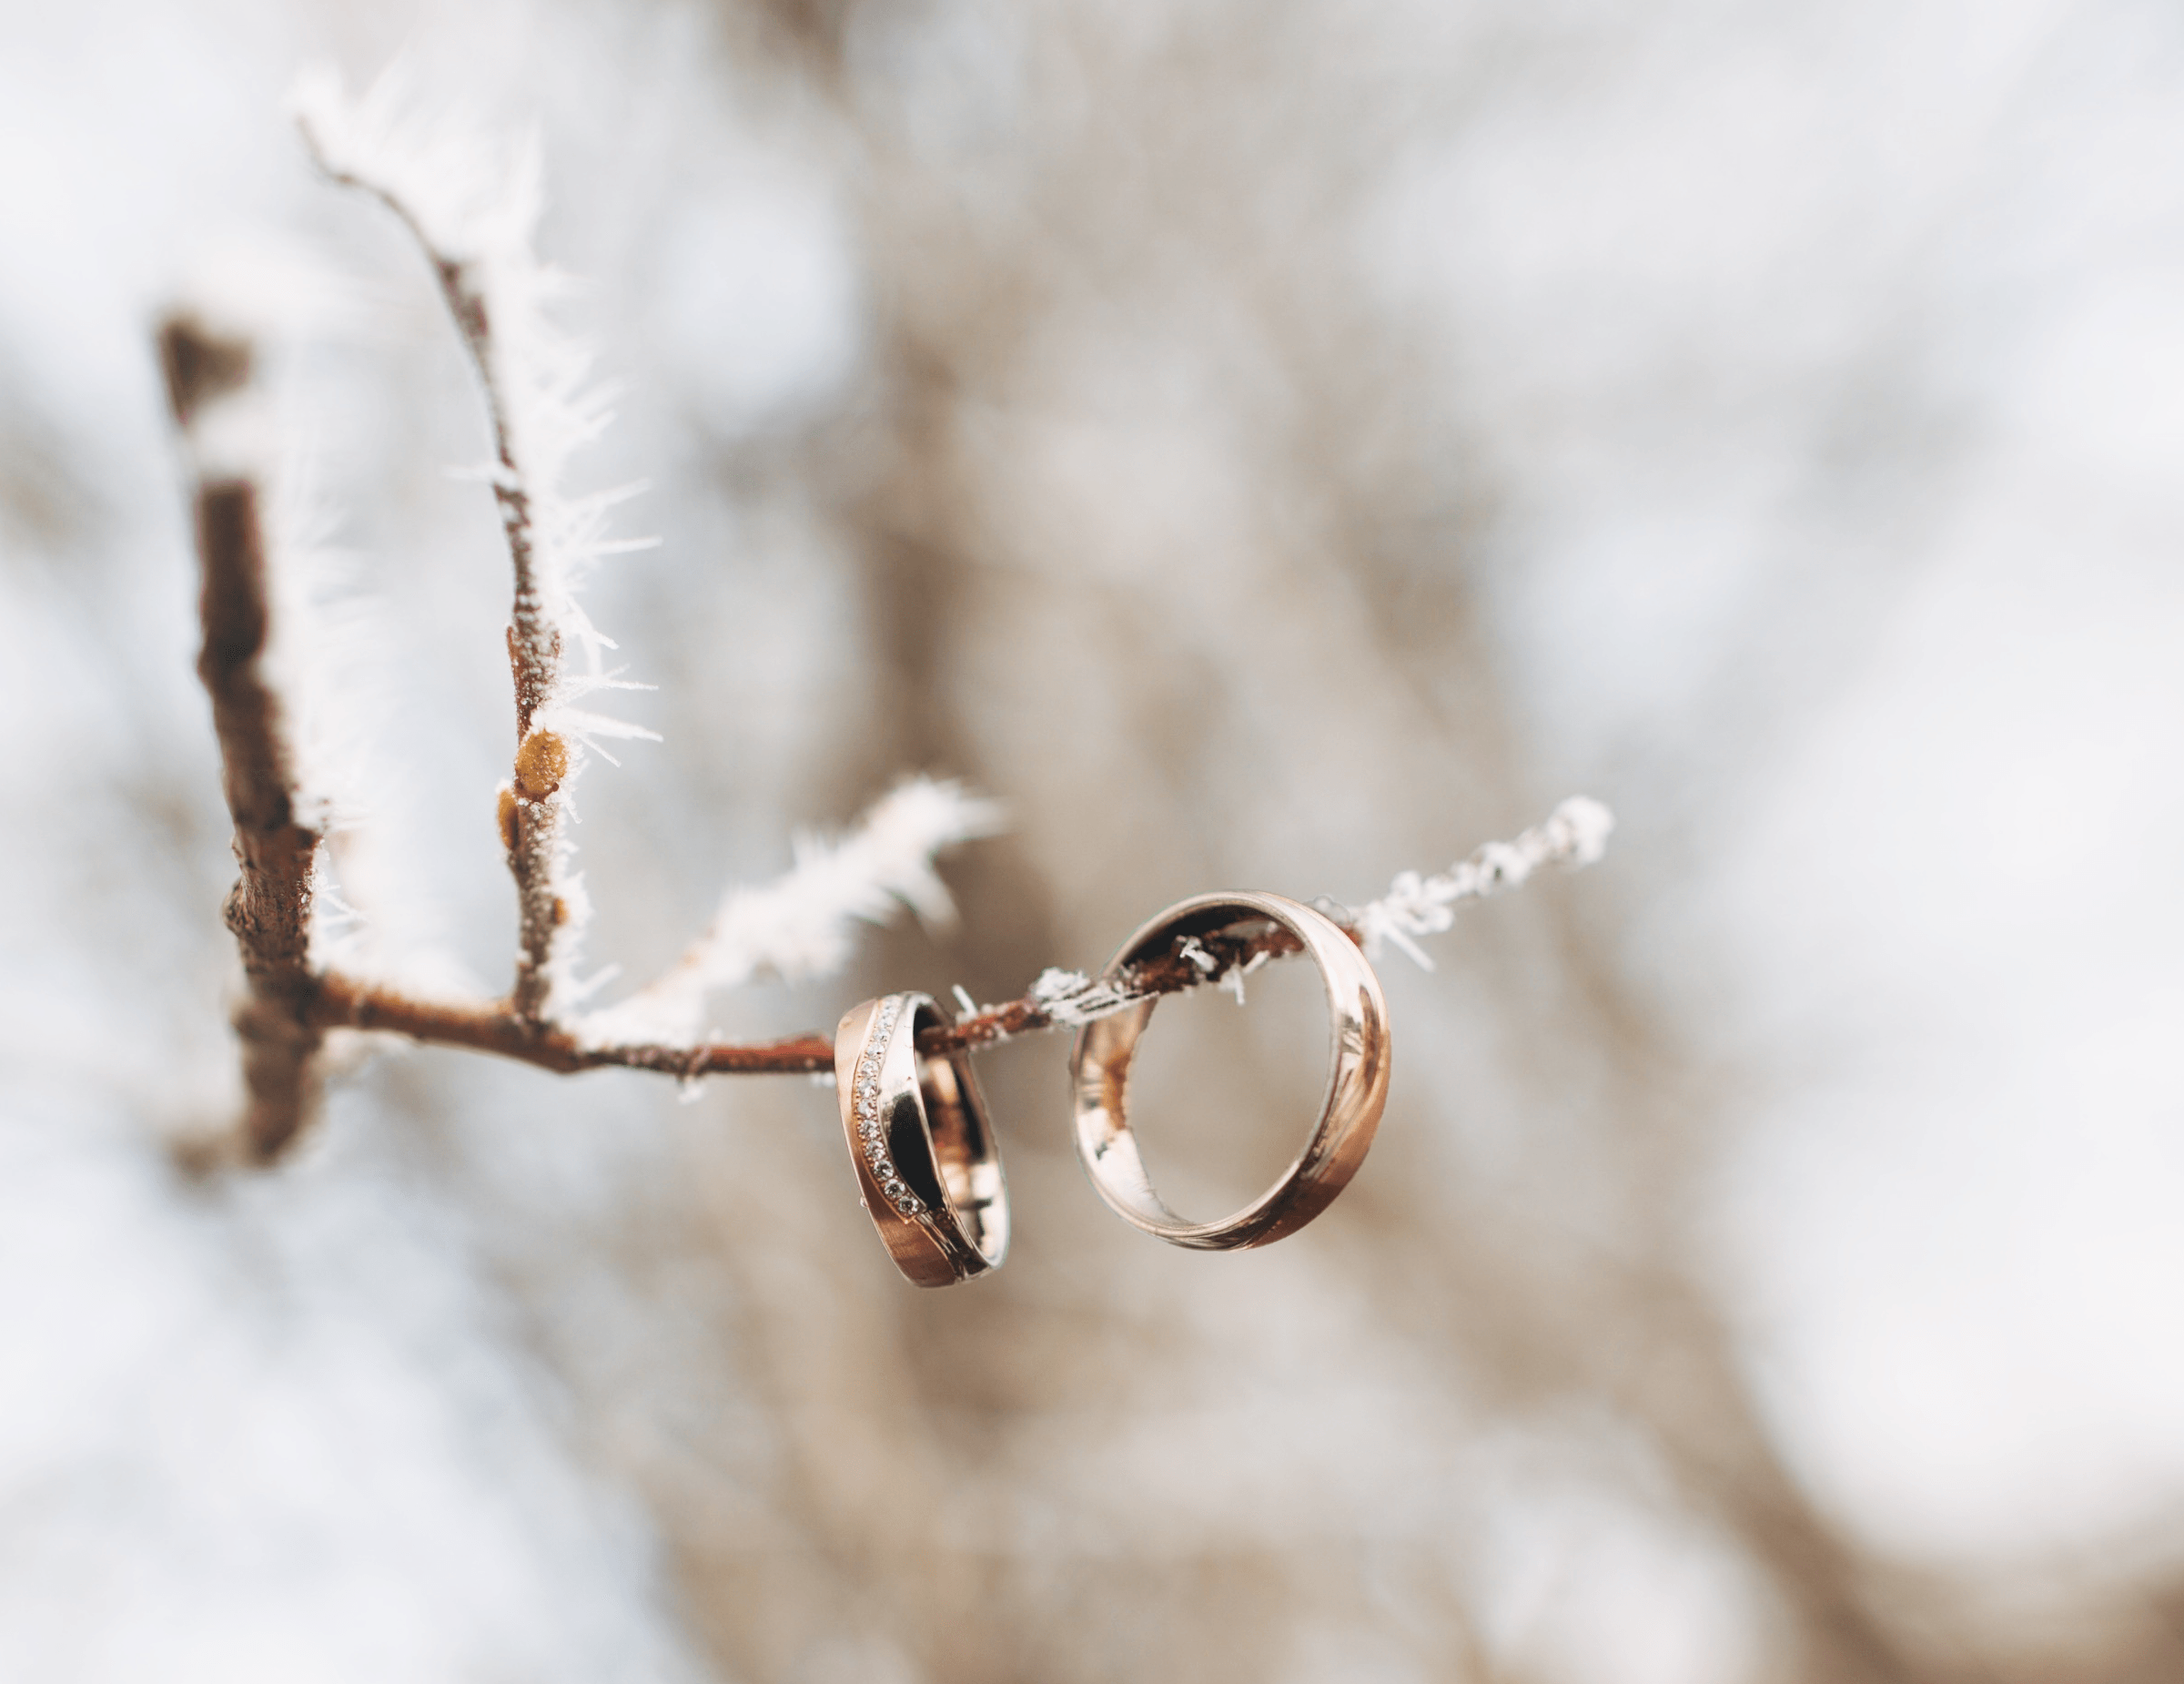 A couple's wedding rings on a branch with frost.